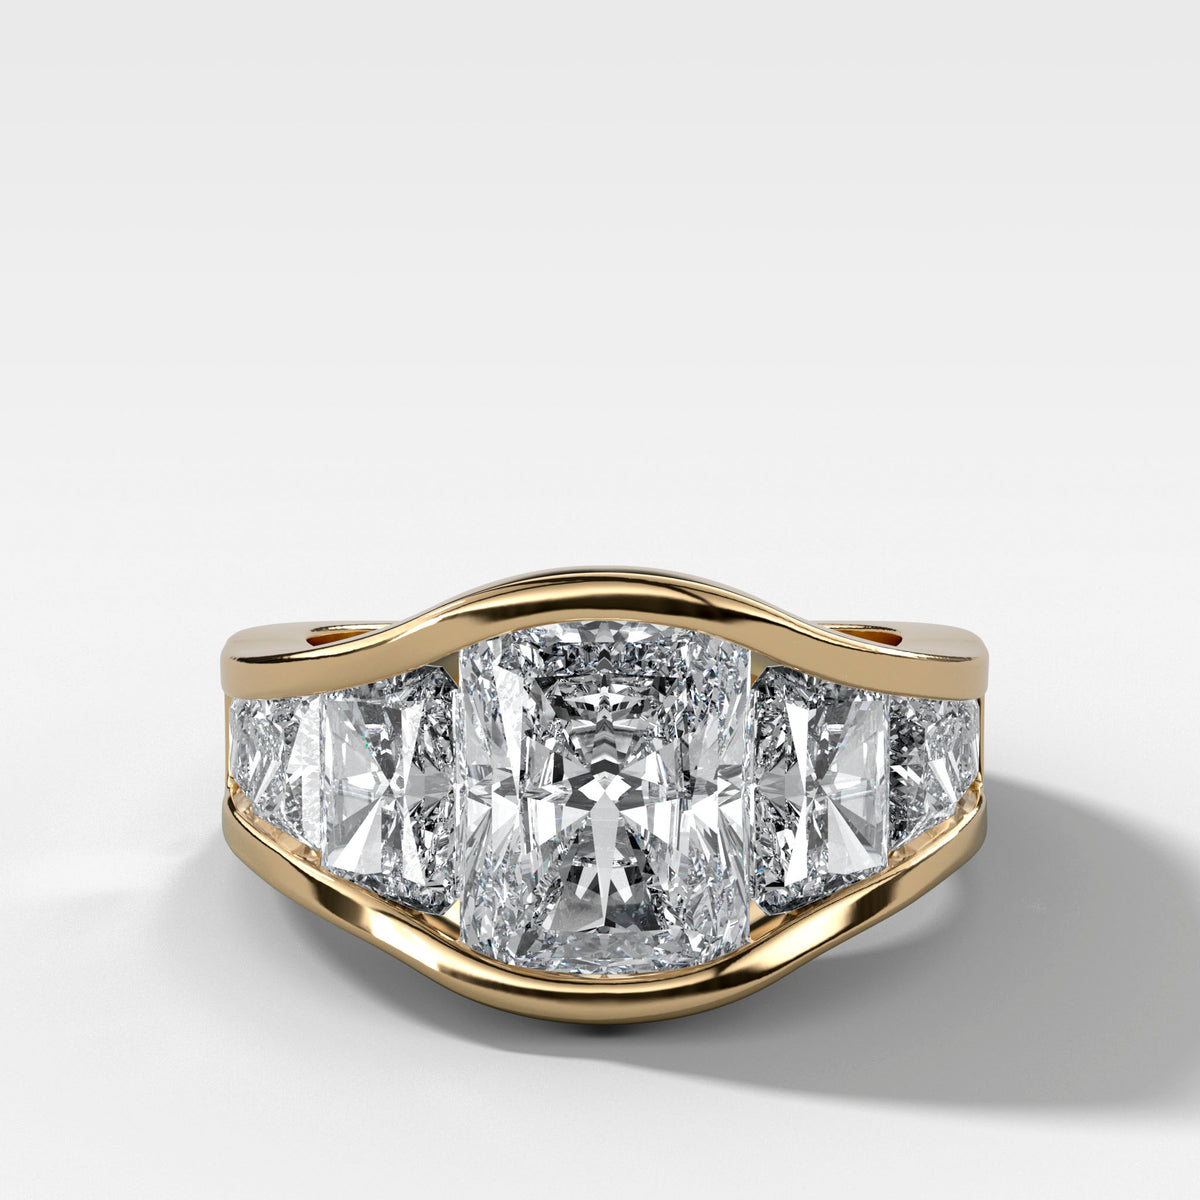 Full Channel Set Engagement Ring with Elongated Radiant and Princess Diamonds